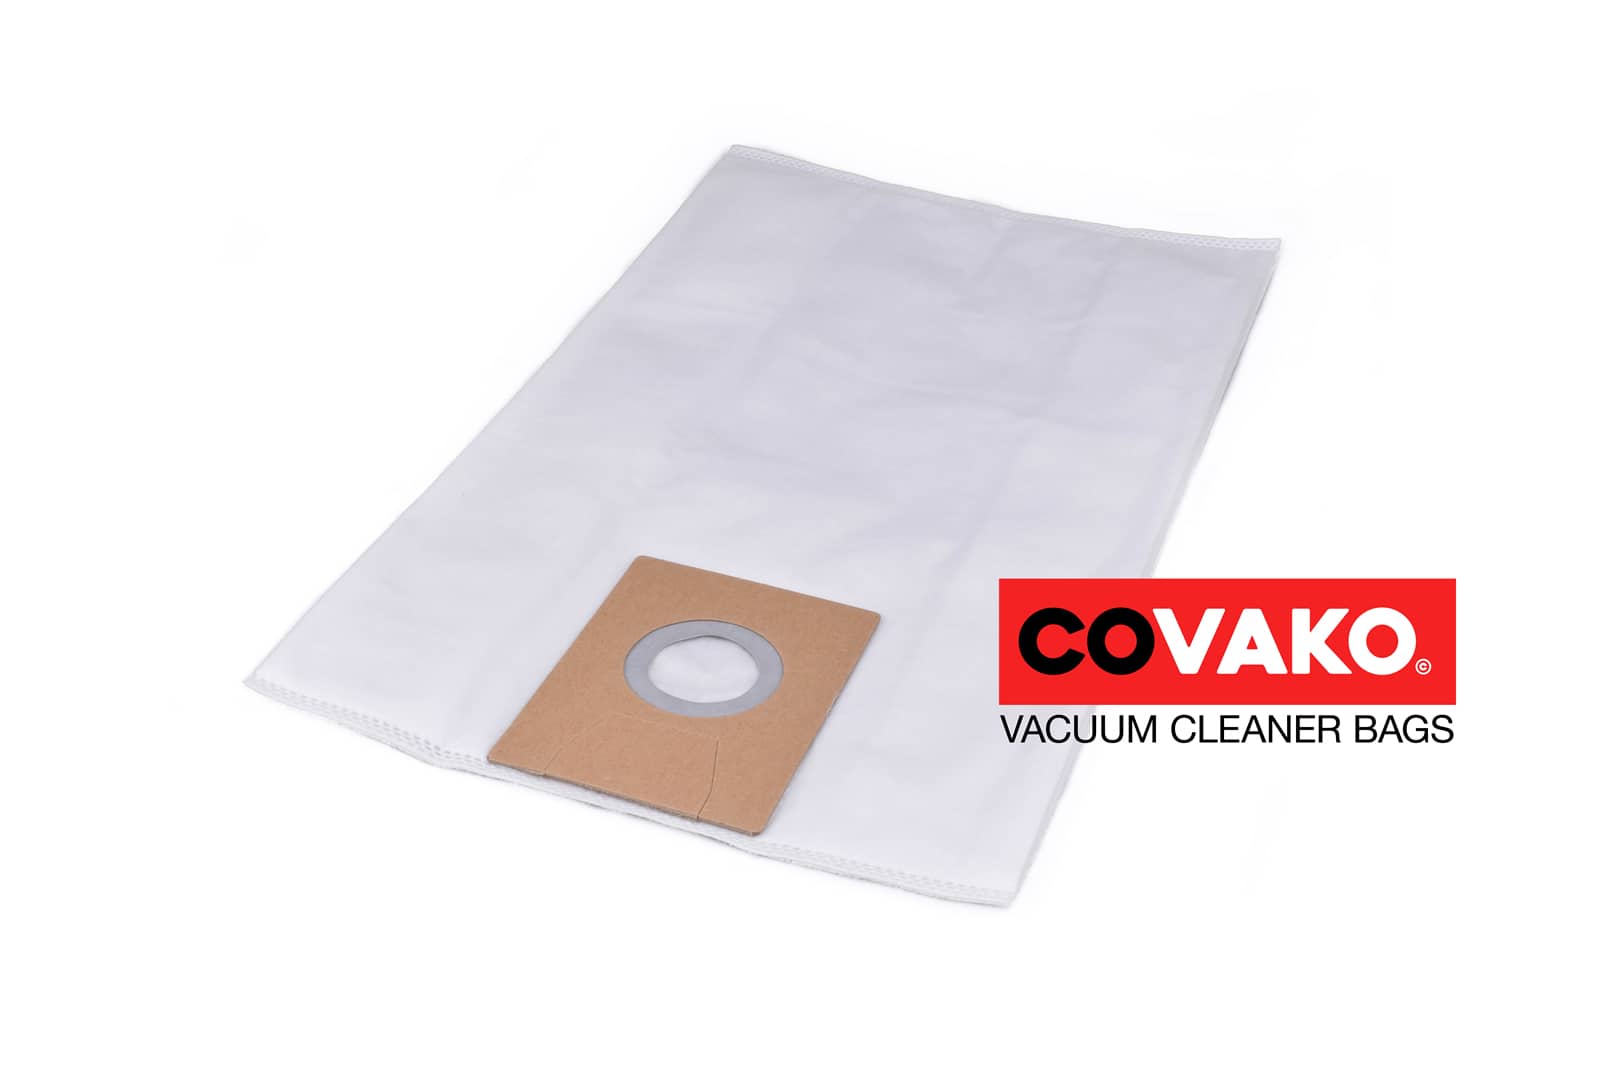 Fakir GS Accu 24/15 RT / Synthesis - Fakir vacuum cleaner bags